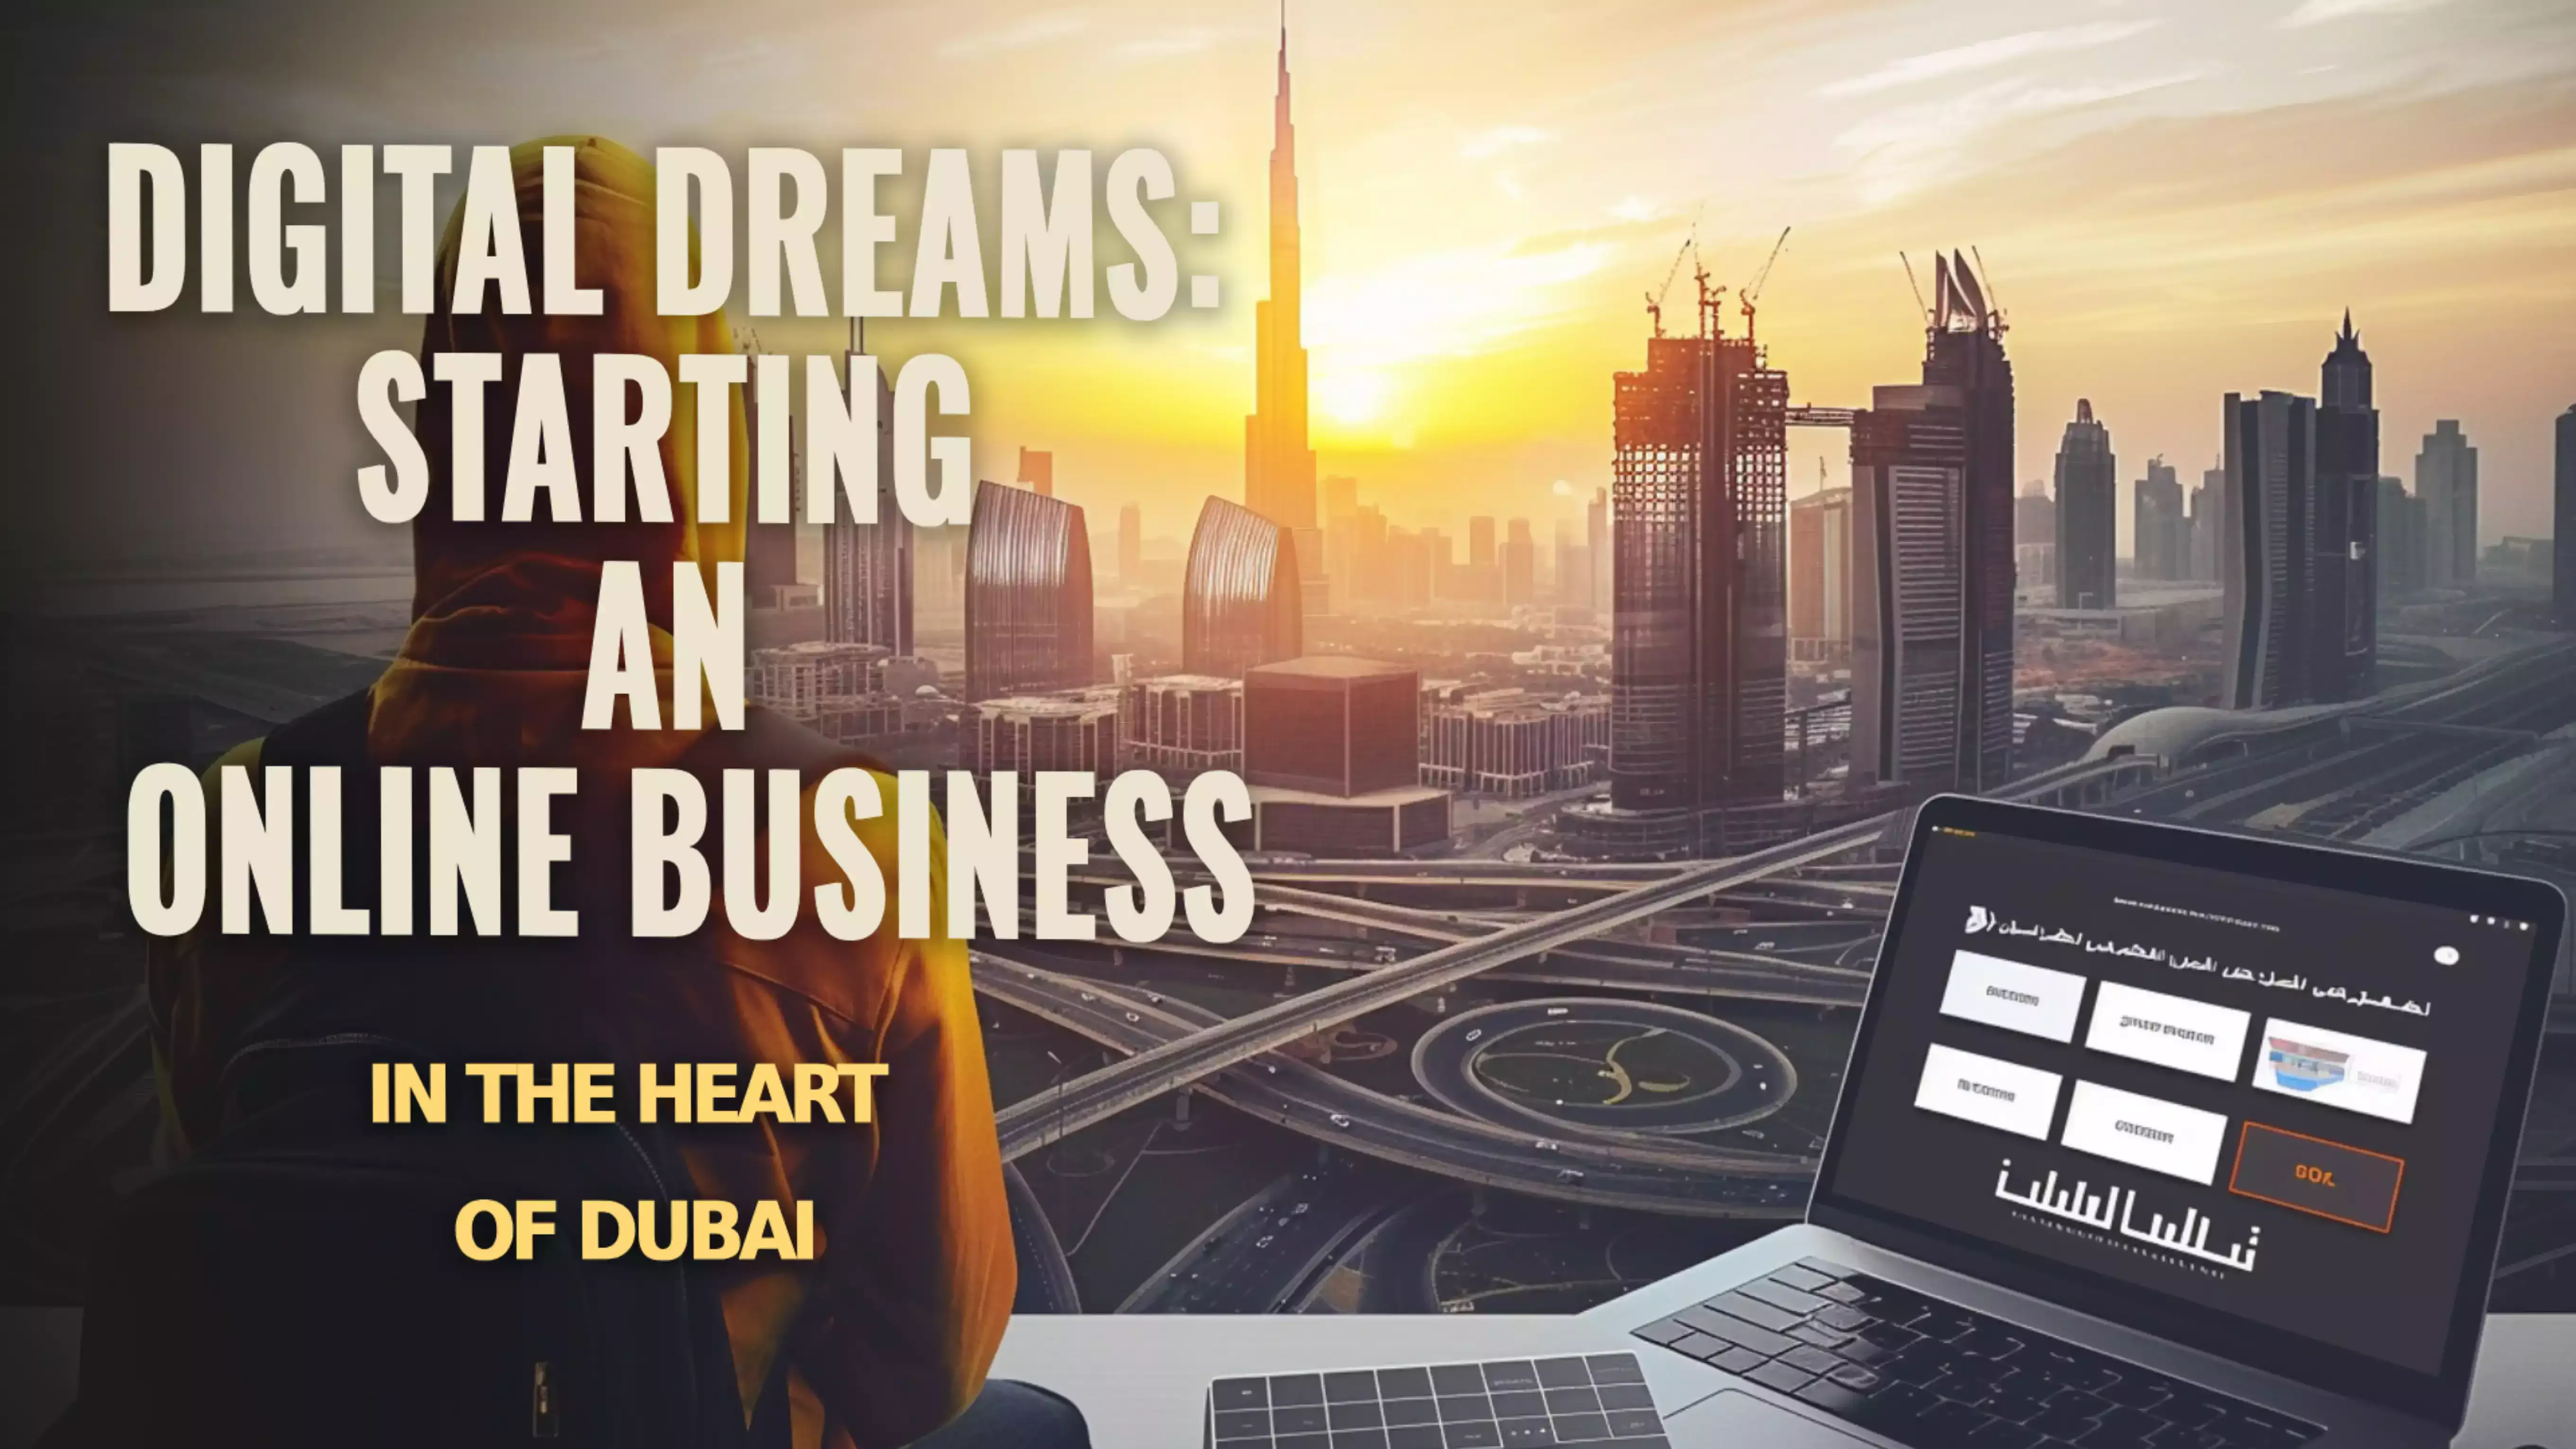 Image showcasing the growth of online business in Dubai